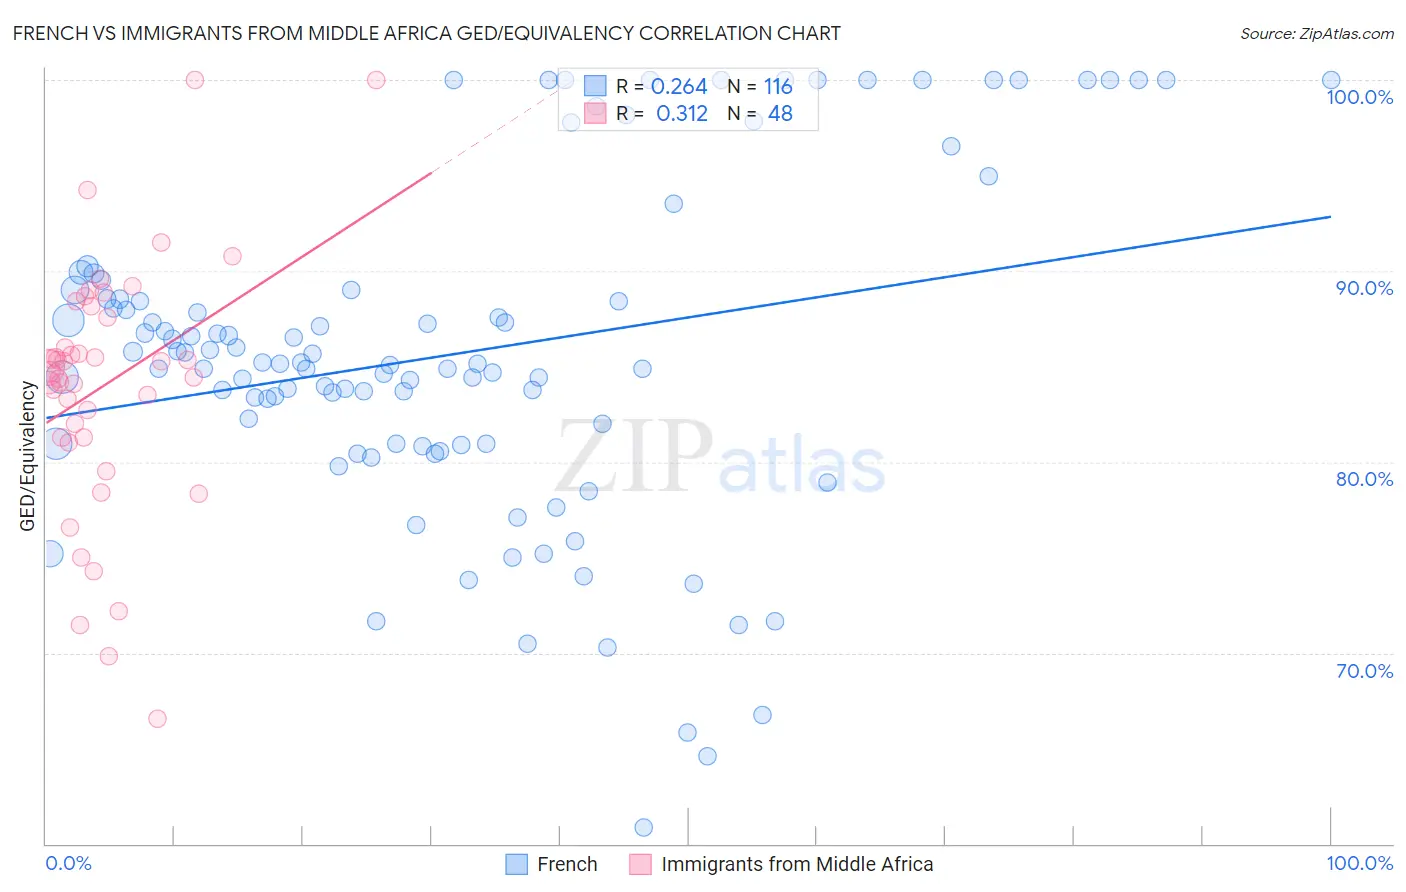 French vs Immigrants from Middle Africa GED/Equivalency